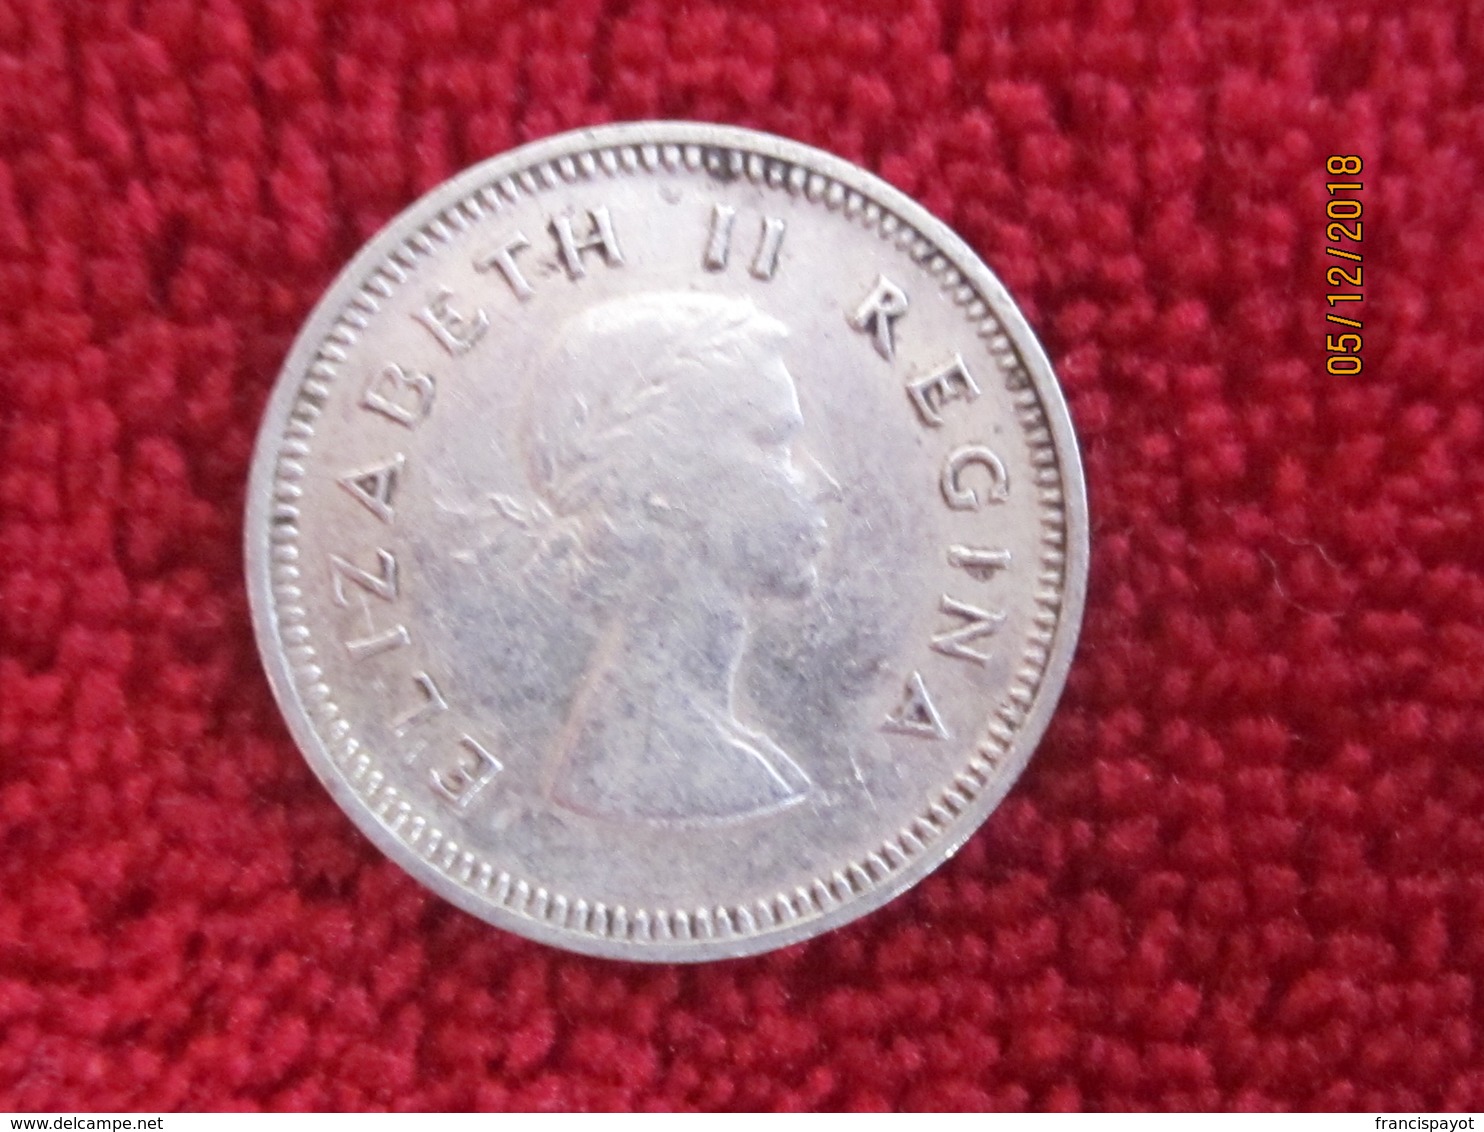 South Africa: 3 Pence 1959 - South Africa